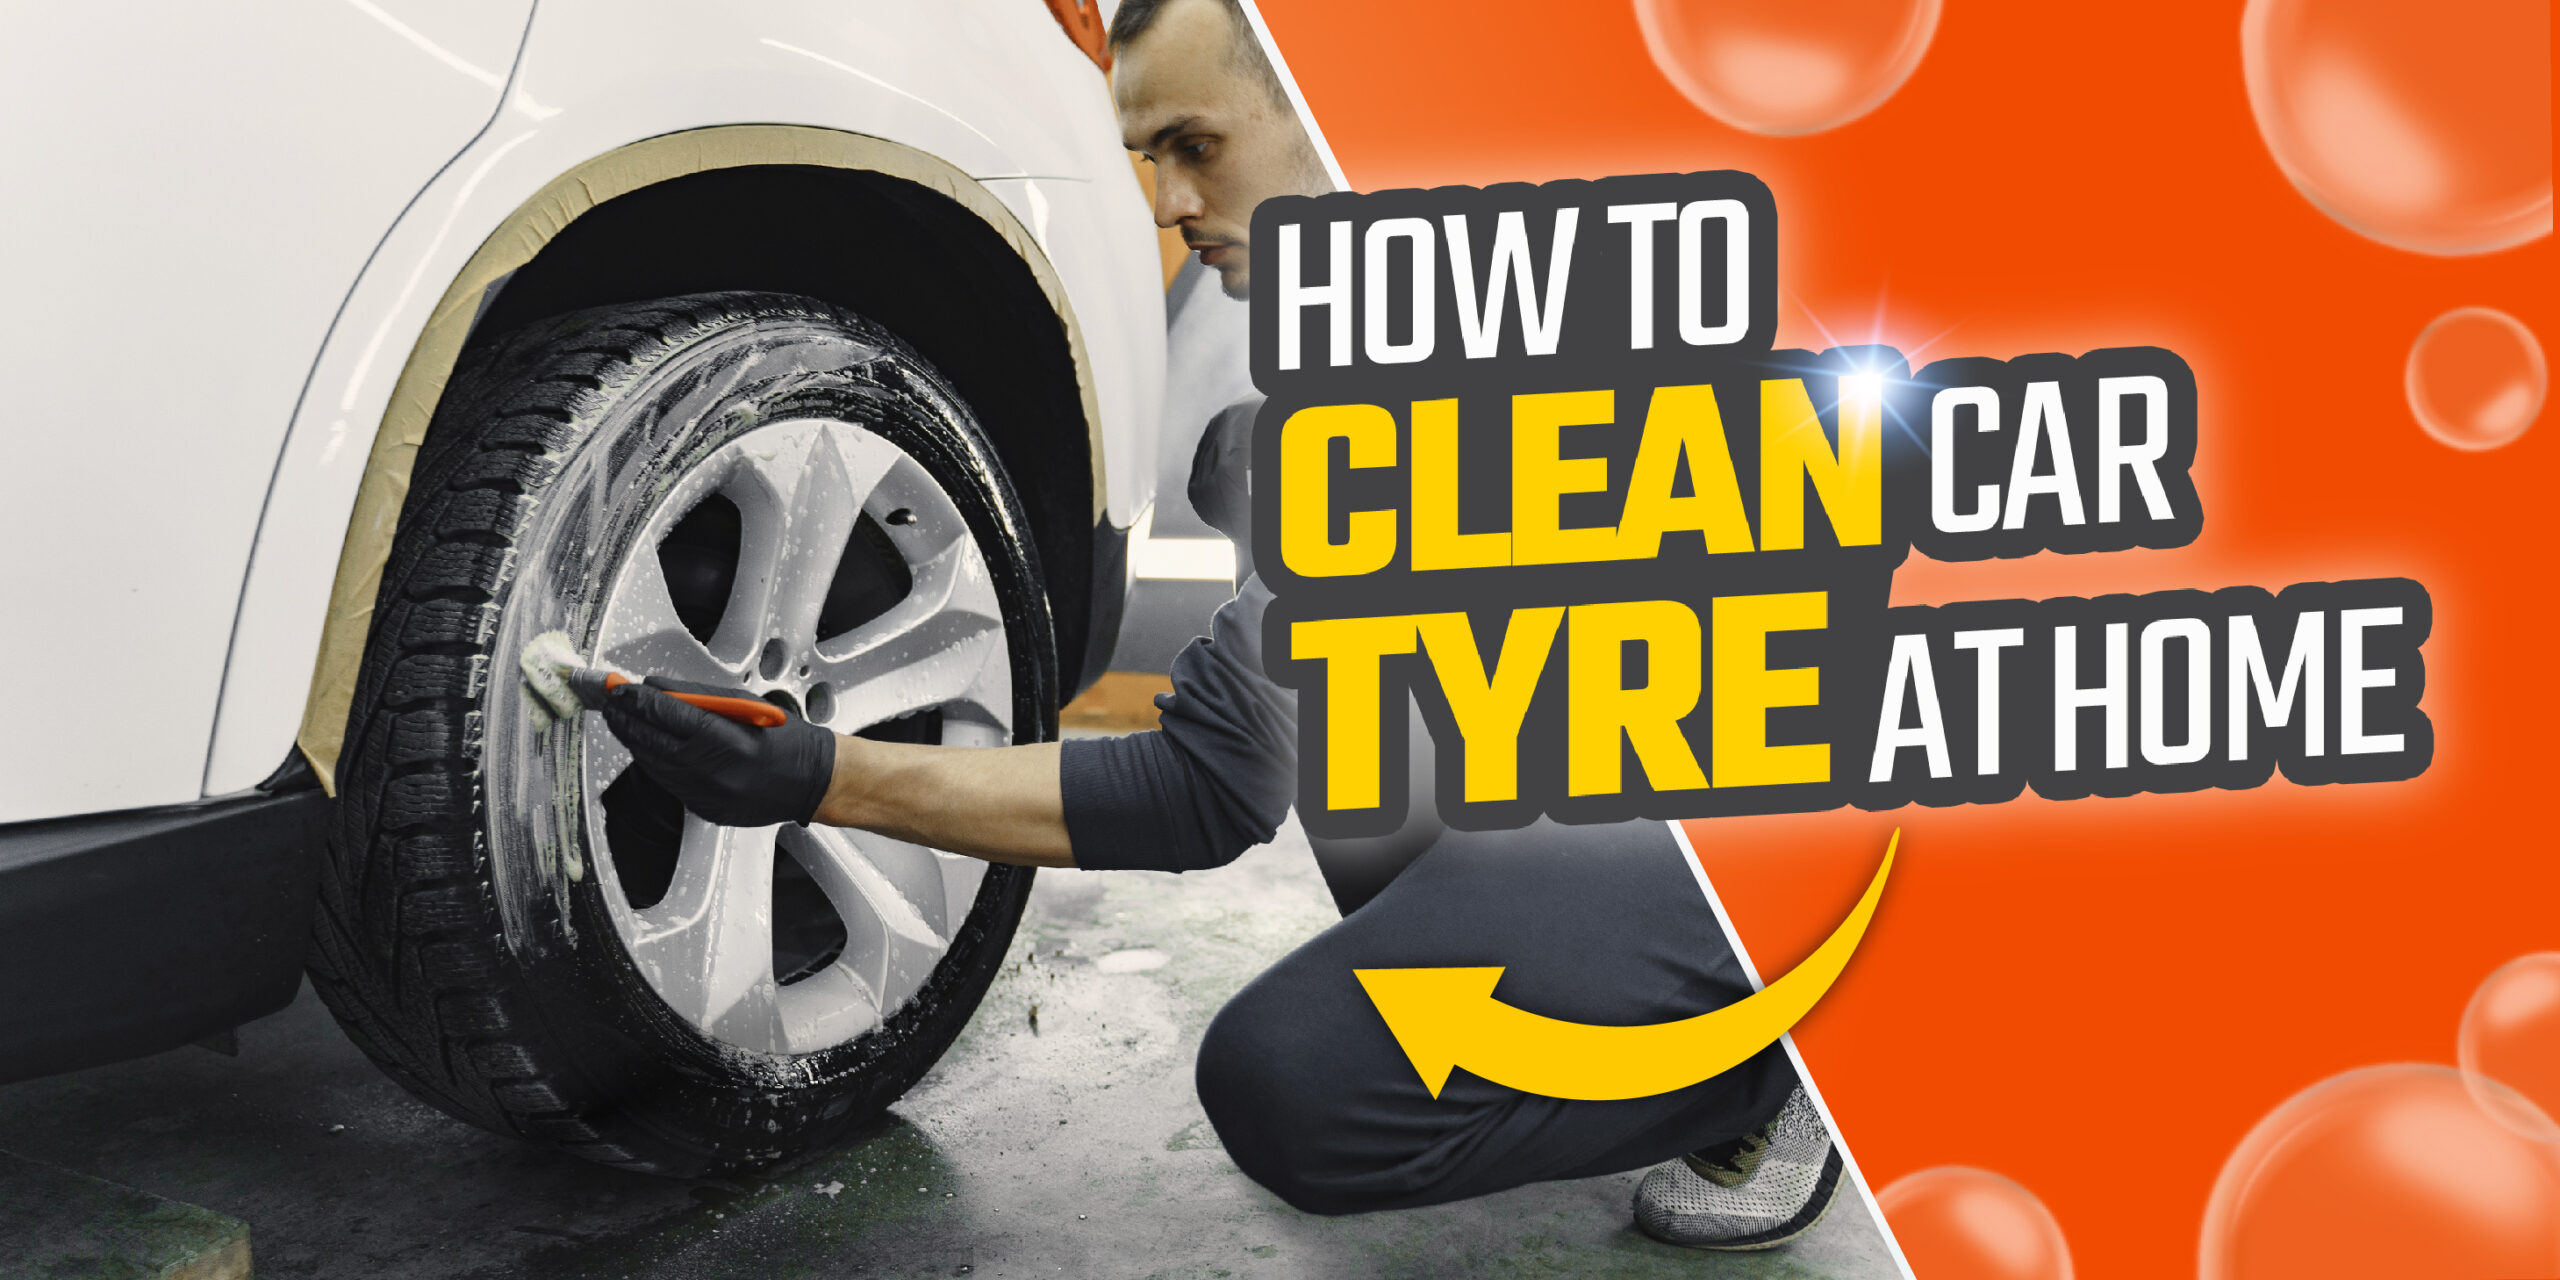 How to clean car tyre at home